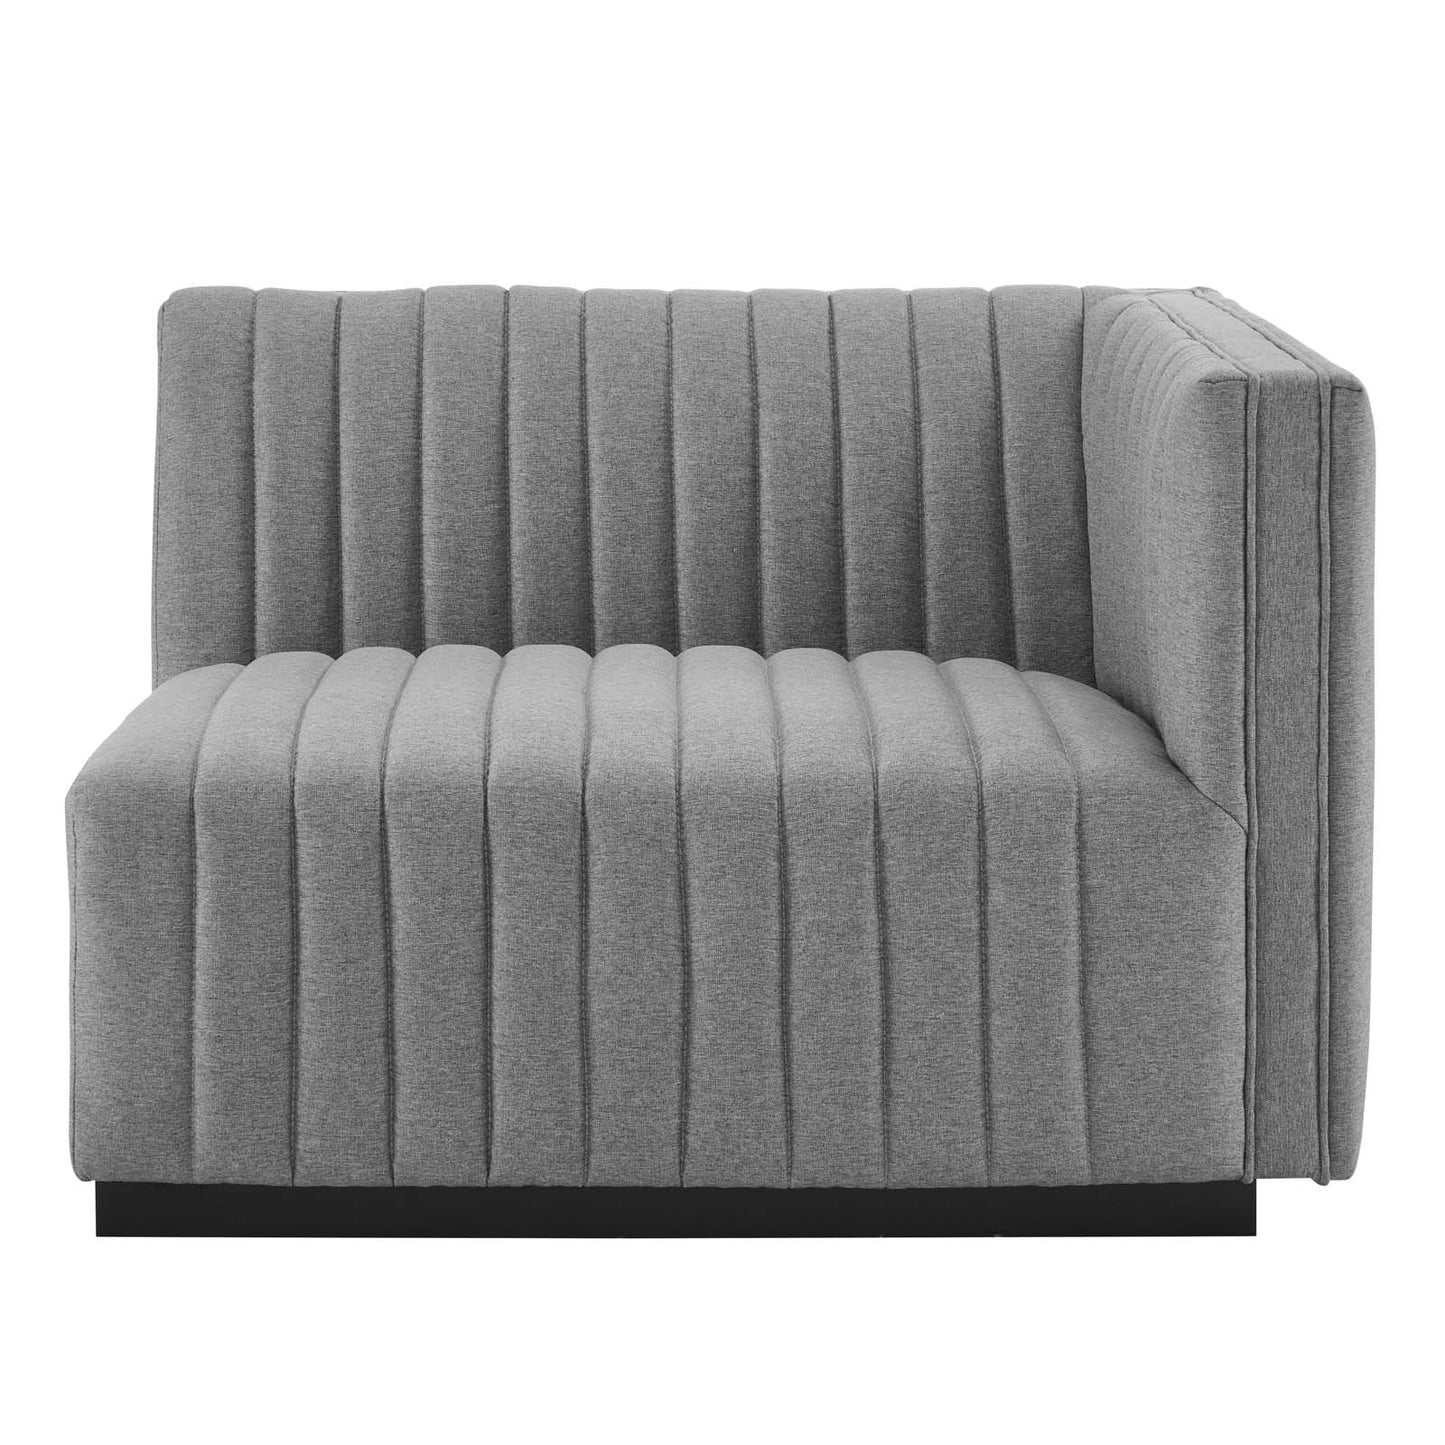 Conjure Channel Tufted Upholstered Fabric Right-Arm Chair Black Light Gray EEI-5493-BLK-LGR